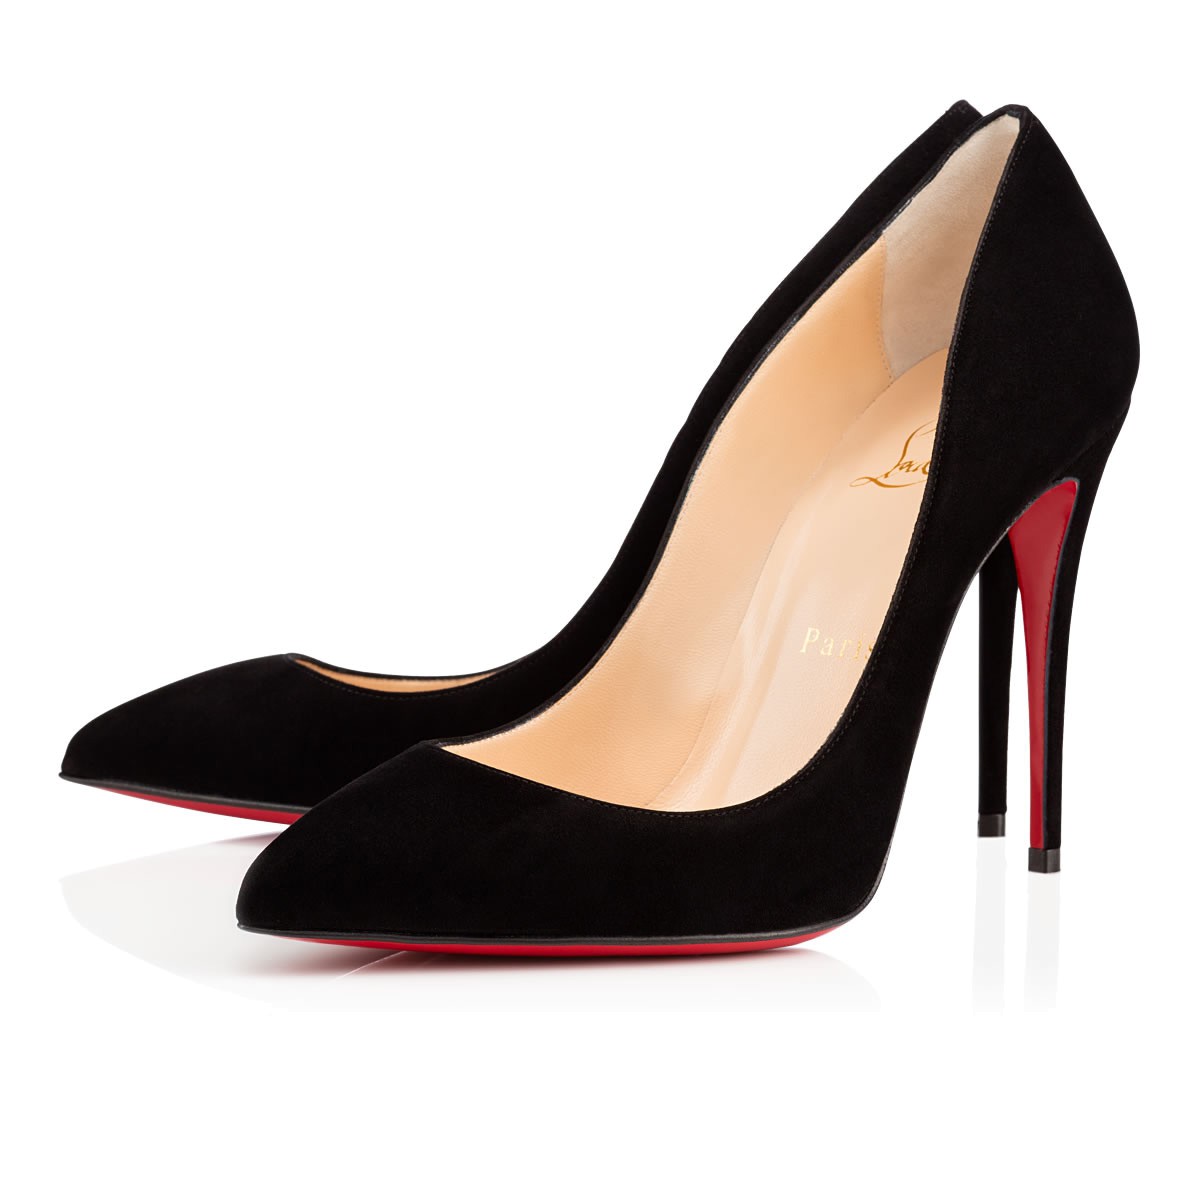 All You Need To Know About: Christian Louboutin